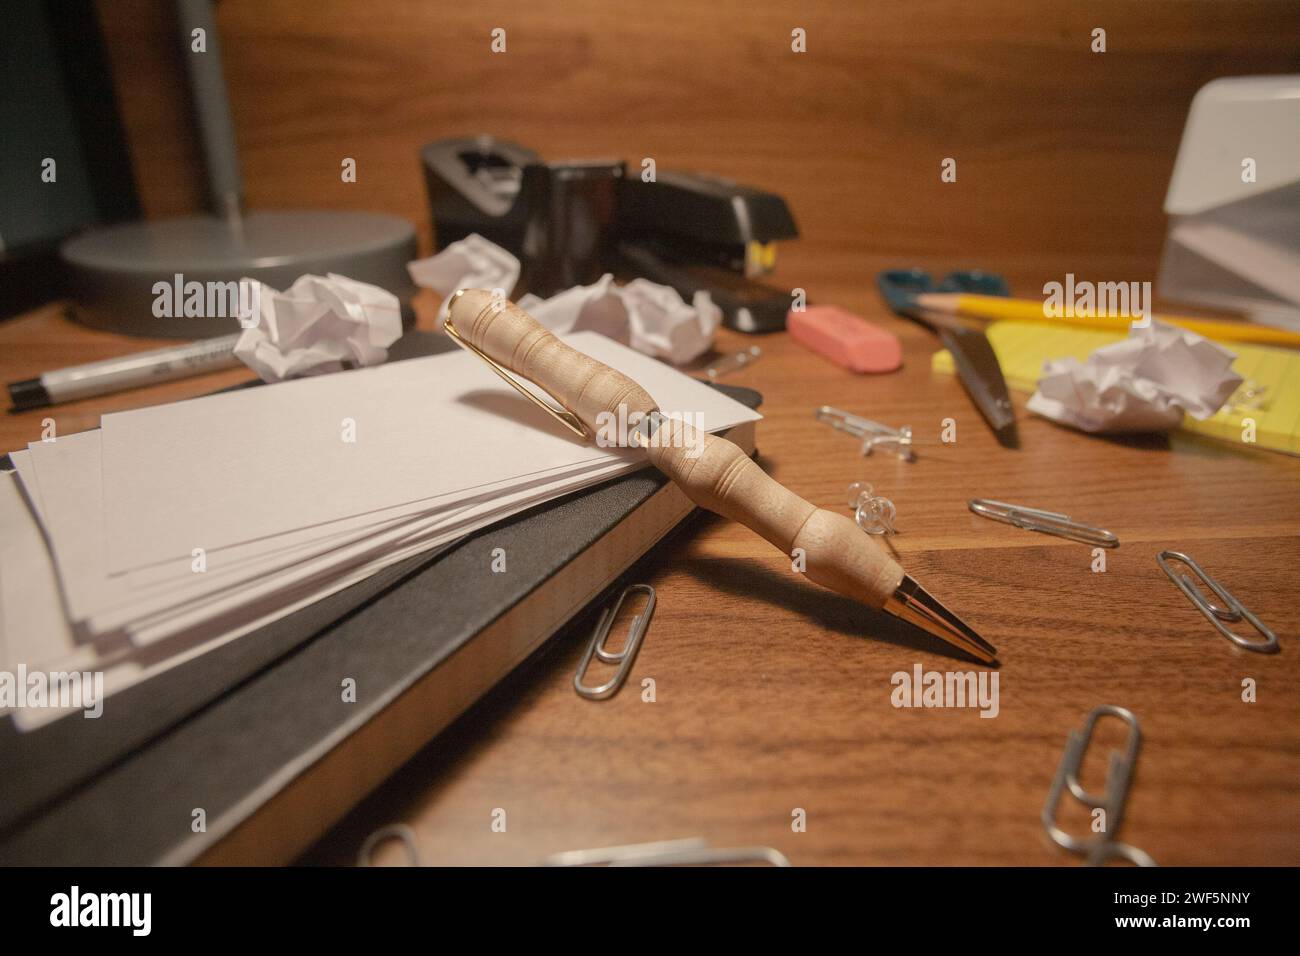 A wooden pen on a messy desk with paper all over Stock Photo